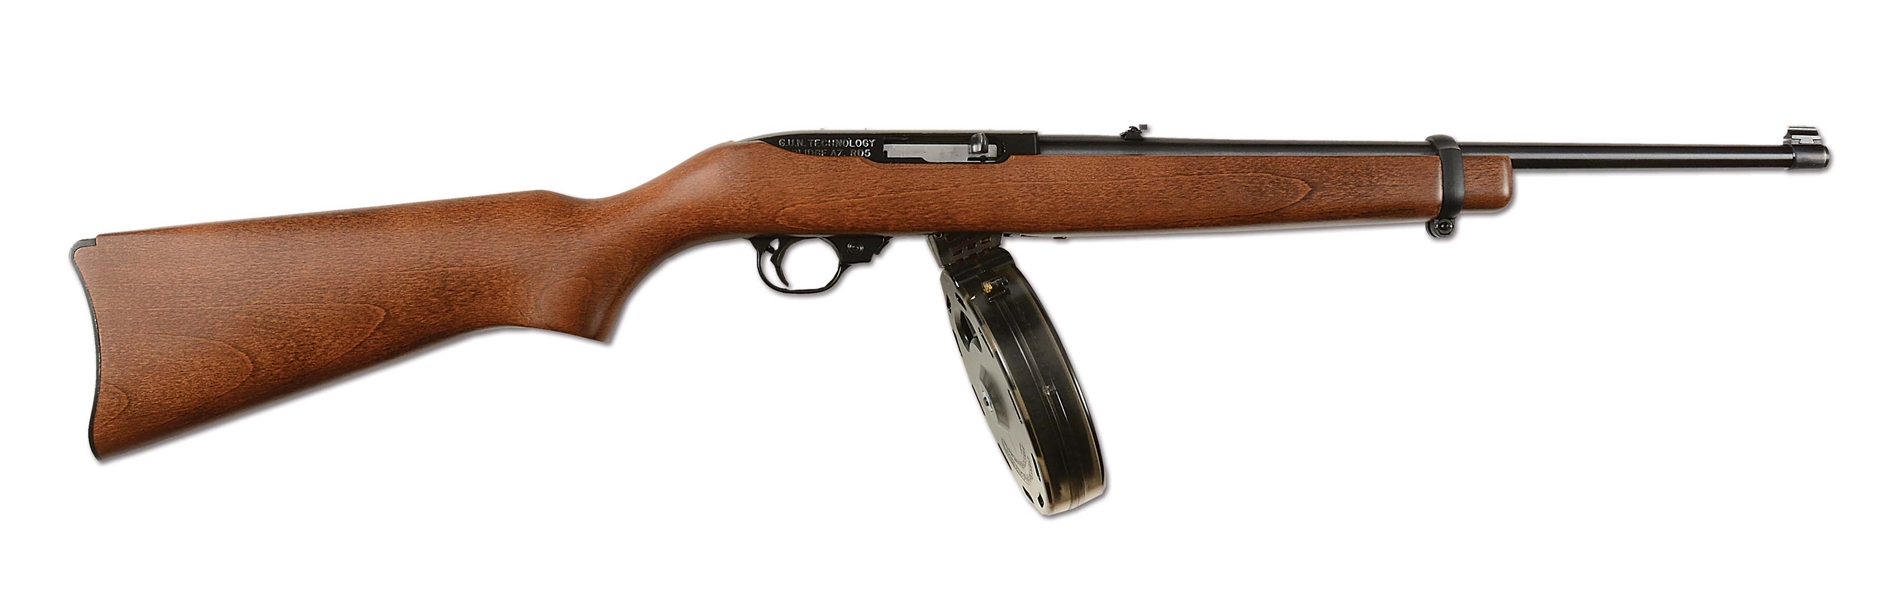 (N) EXTREMELY POPULAR AND VERY DESIRABLE RUGER NORRELL 10/22 MACHINE GUN (FULLY TRANSFERABLE).